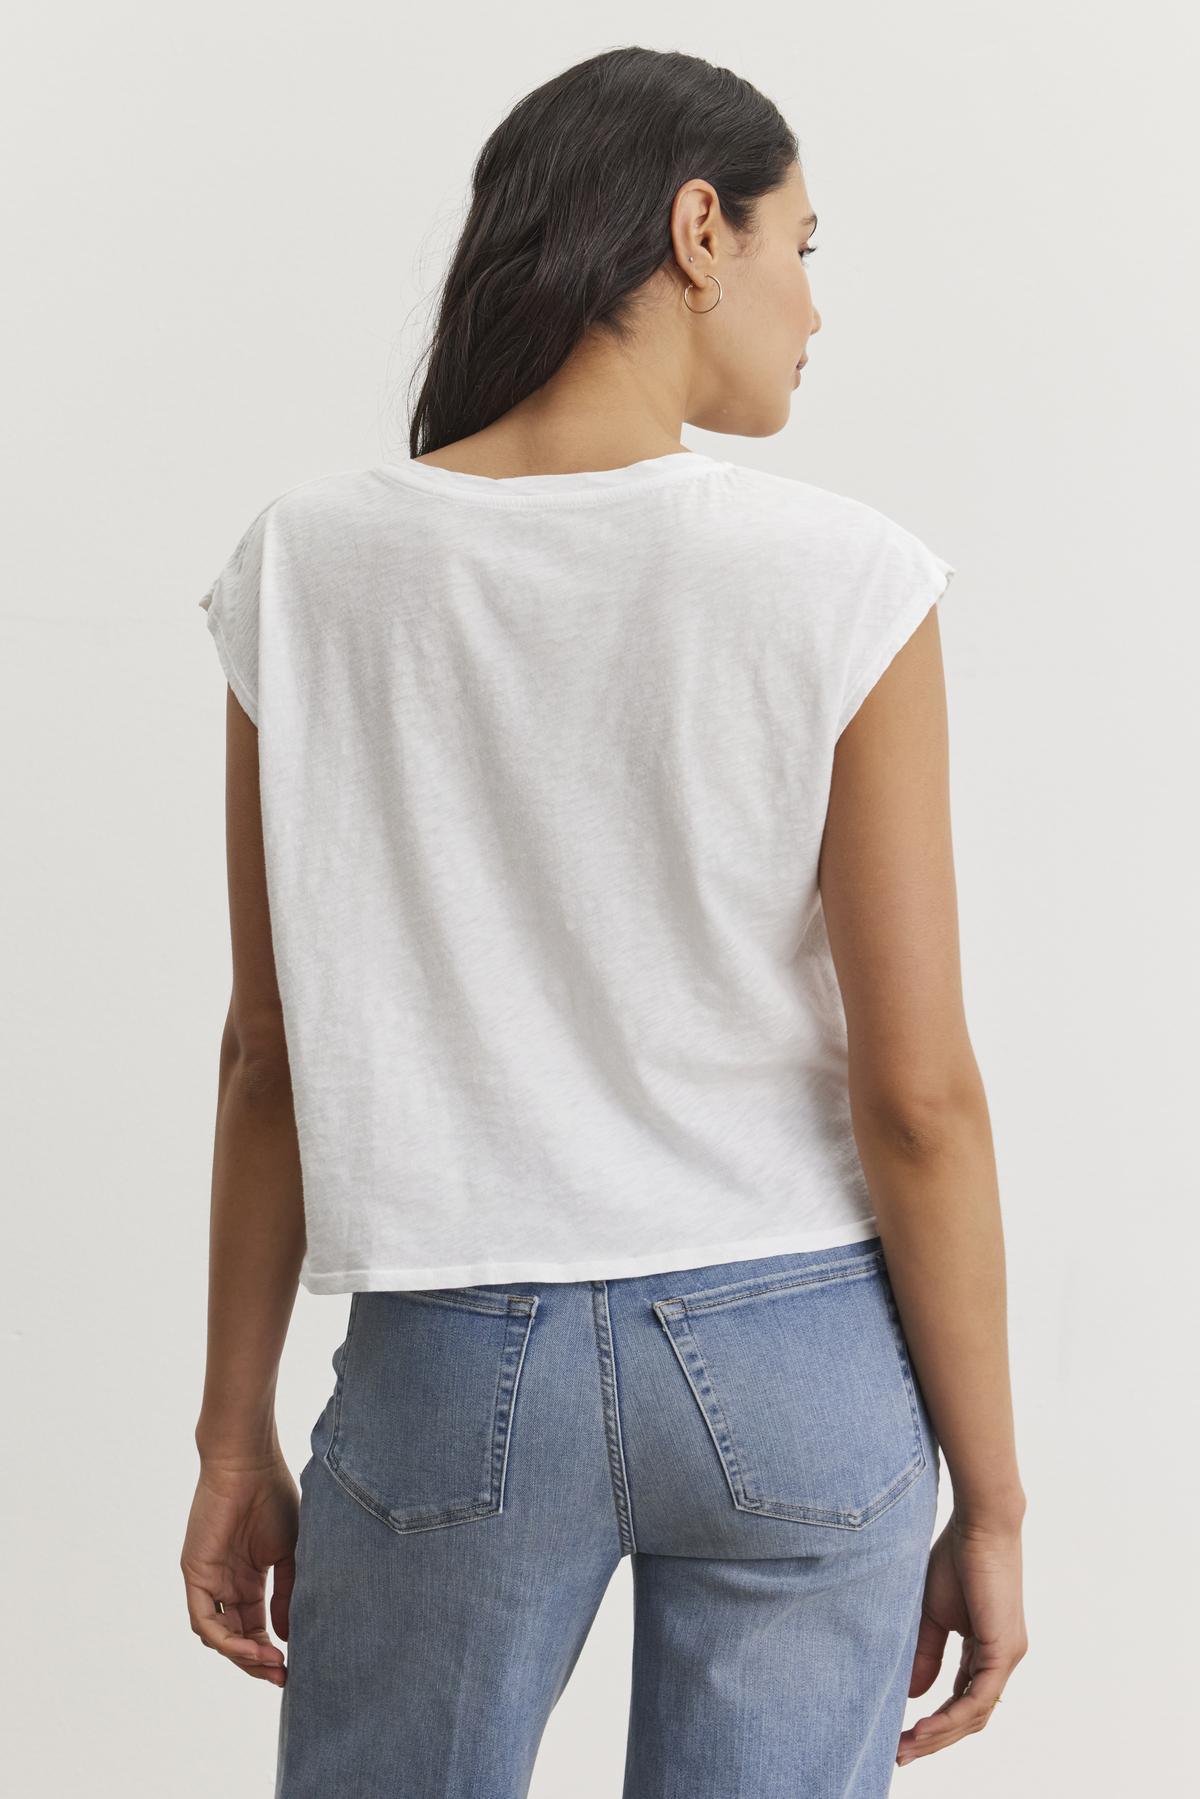   A woman with long brown hair is seen from the back, wearing a white DANIELLA CREW NECK TEE made of lightweight cotton woven fabric and light blue jeans by Velvet by Graham & Spencer. She stands against a plain white background, embodying a casual basic style. 